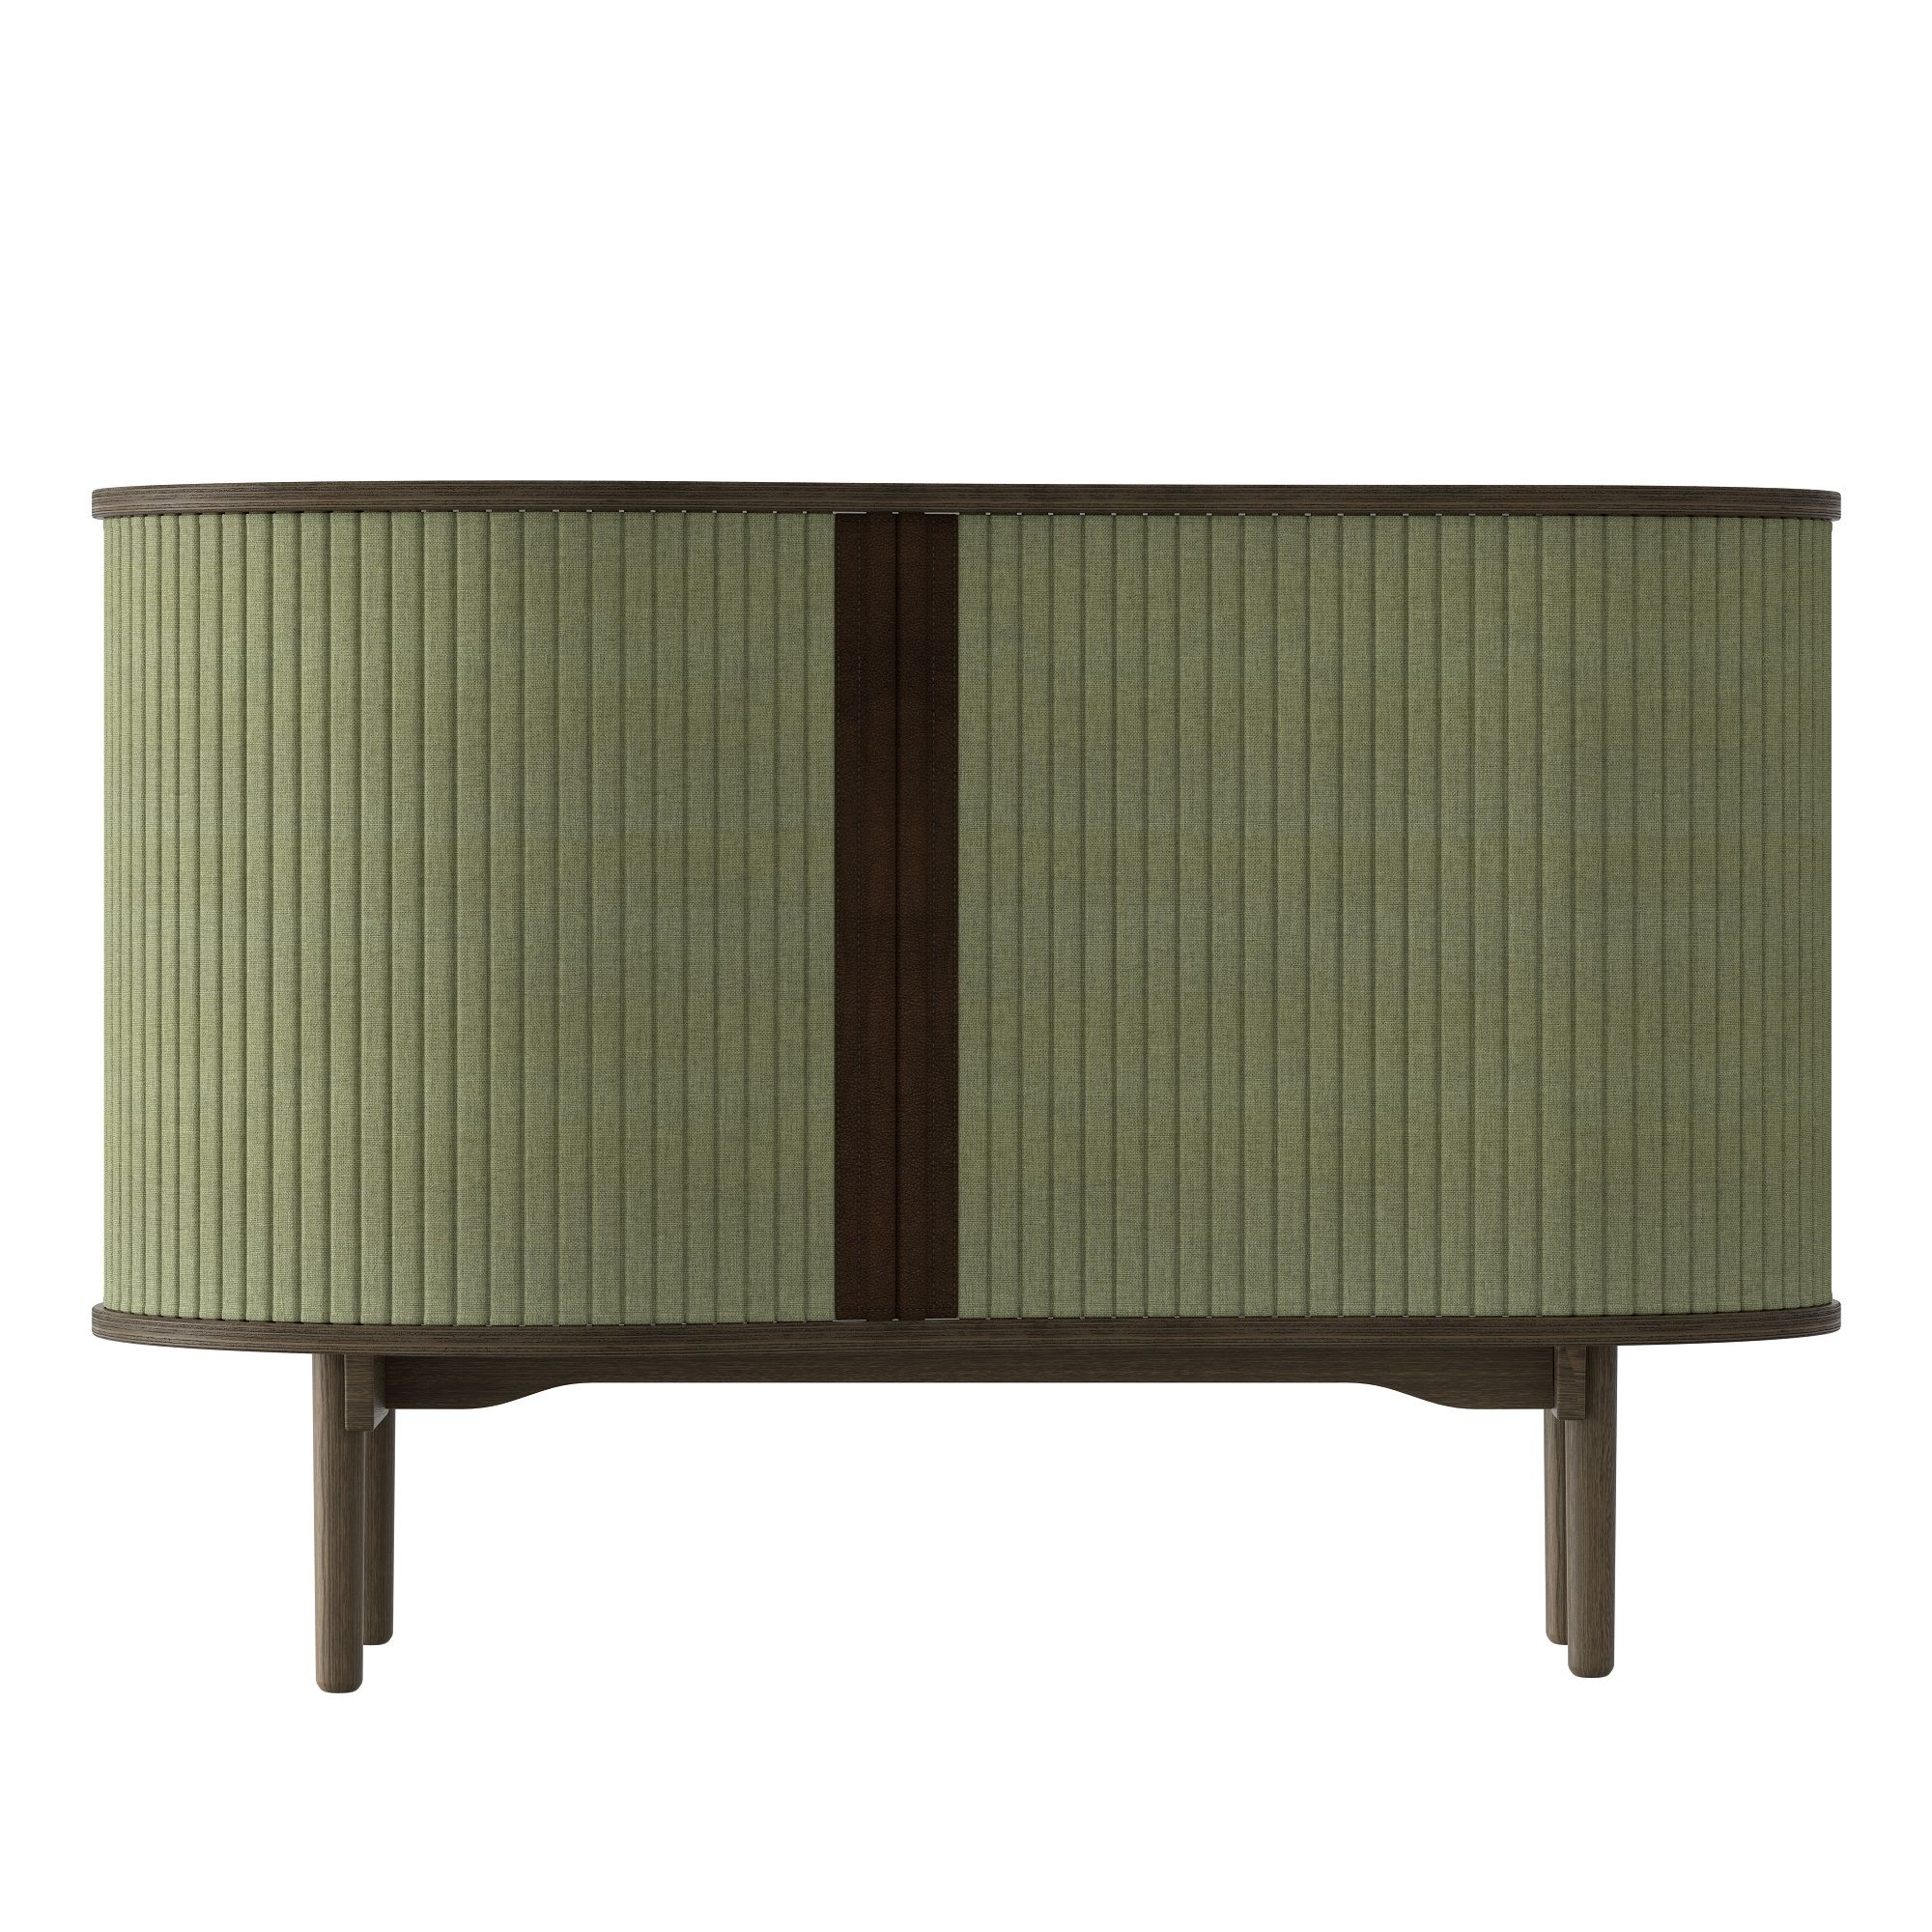 Audacious bedside table, green